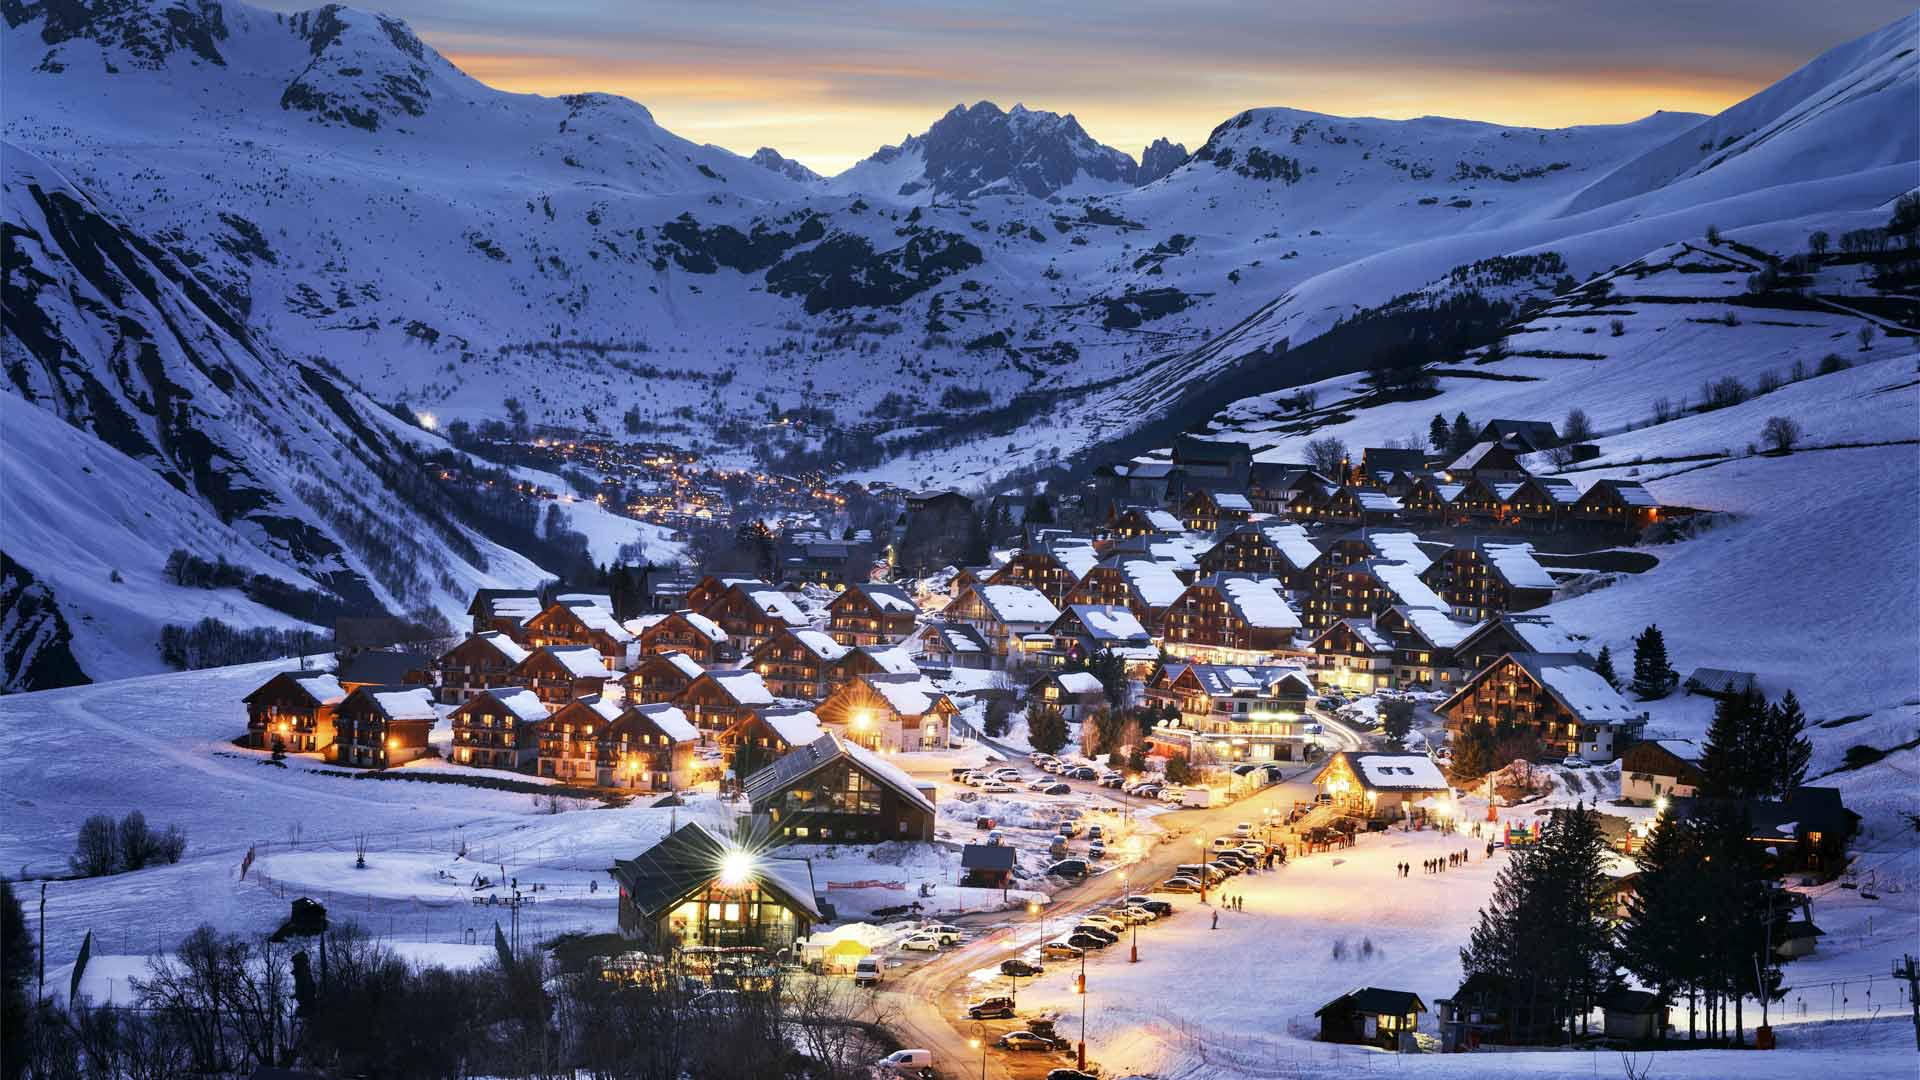 Best places and travel tips for a luxury winter holiday in Europe